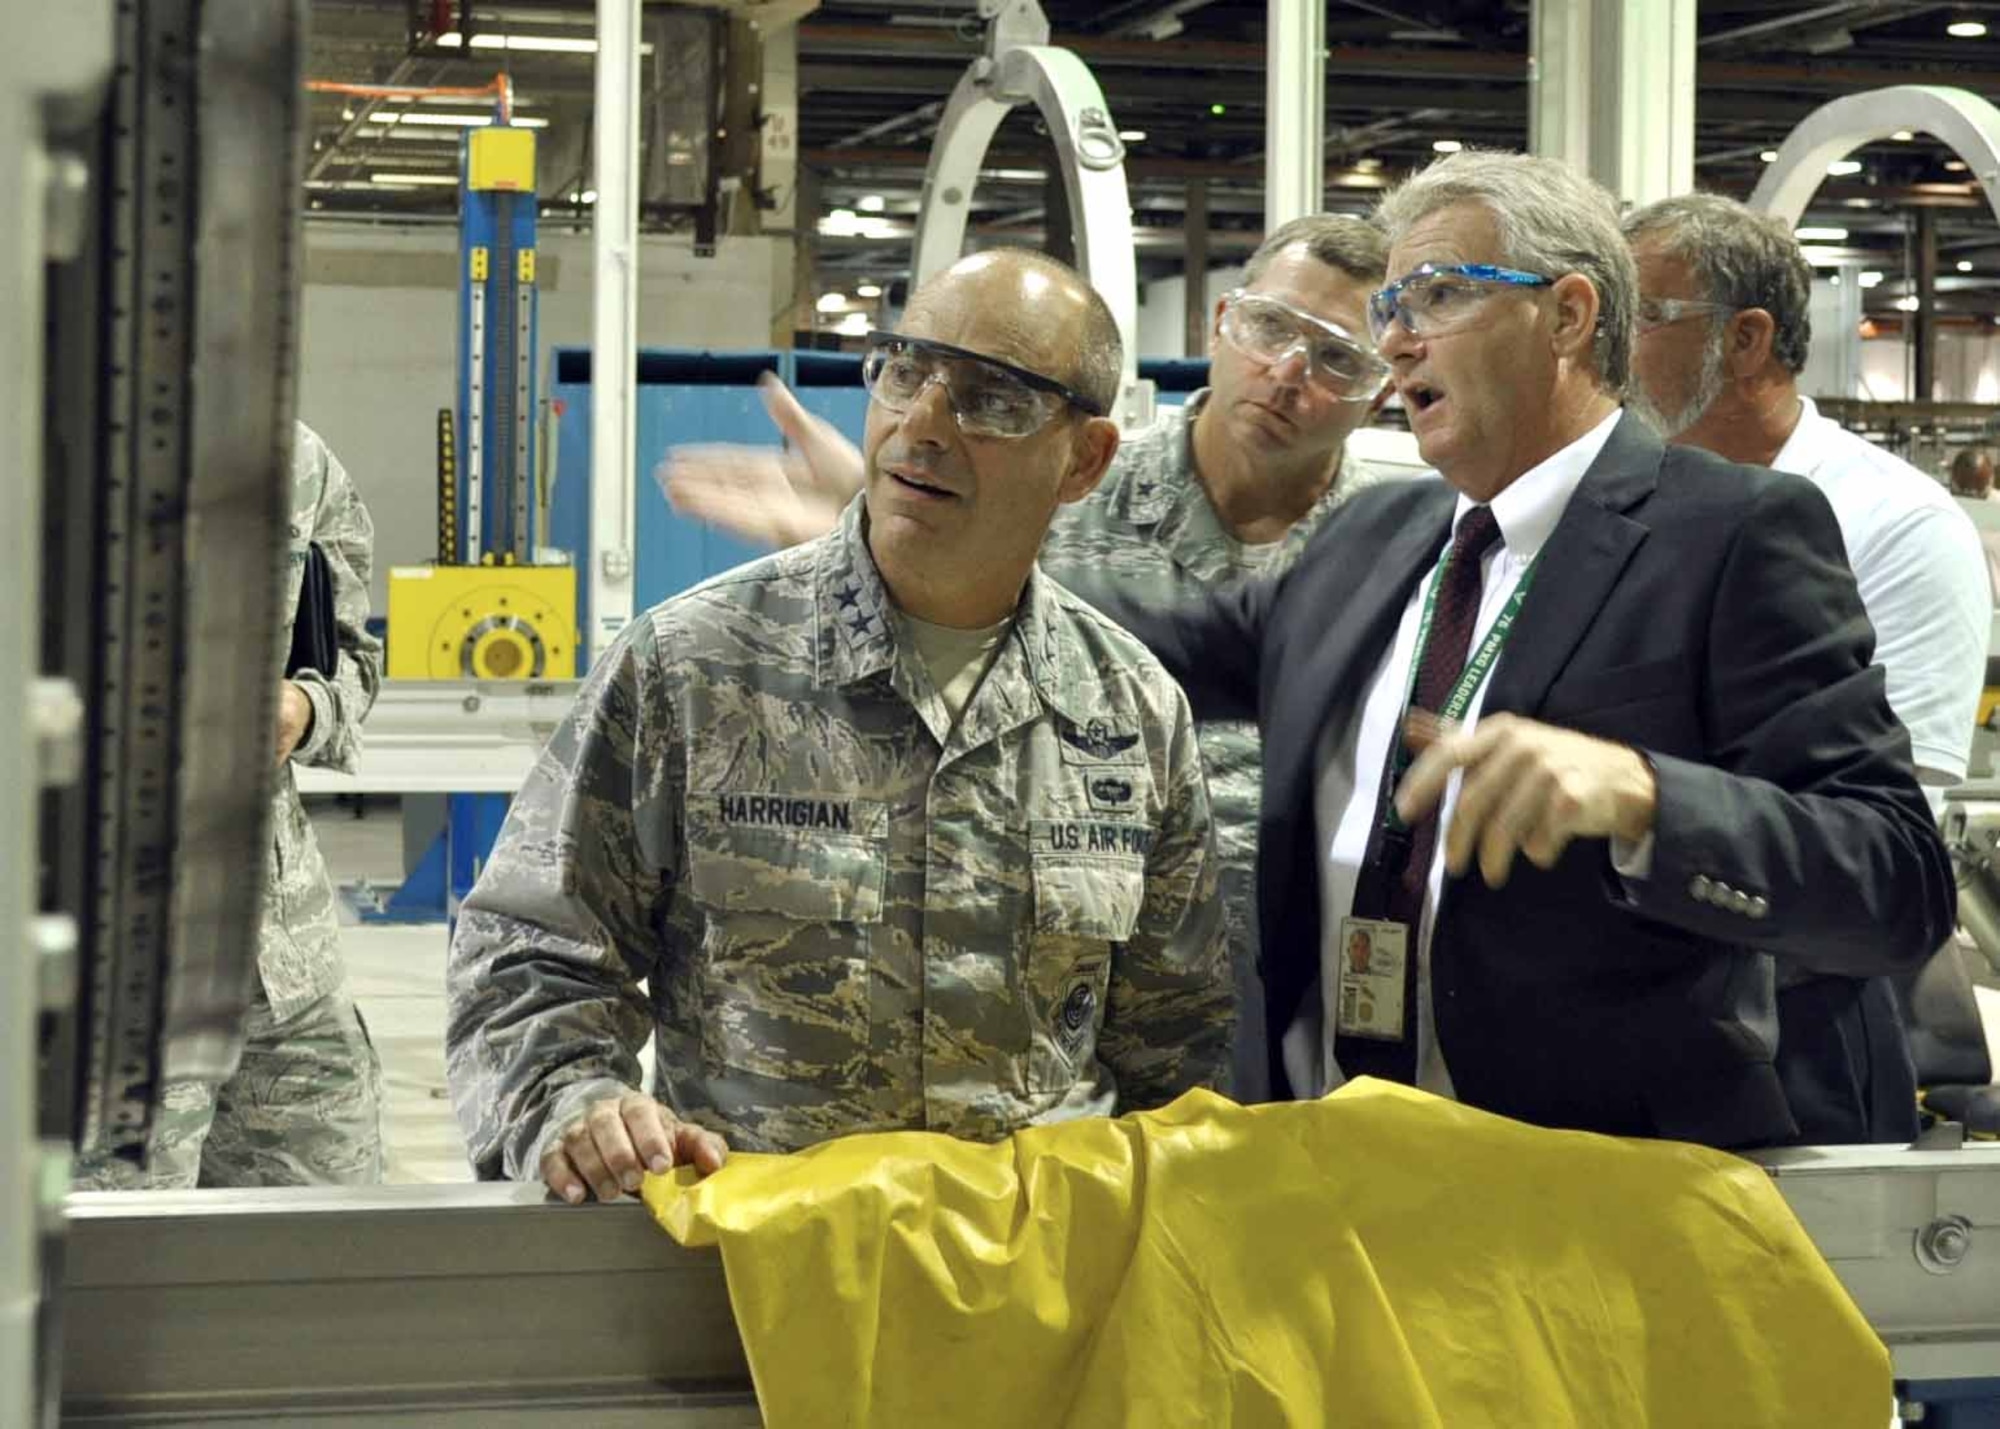 Mike Opela, the 544th Propulsion Maintenance Squadron director, discusses the process of modifying a Marine short take off and vertical landing F135 engine with Maj. Gen. Jeffrey L. Harrigian, the director of the F-35 Integration Office, Headquarters Air Force, during a visit to the Air Force Sustainment Center and Oklahoma City Air Logistics Complex where the modification is performed. (U.S. Air Force photo/Marlin Zimmerman) 